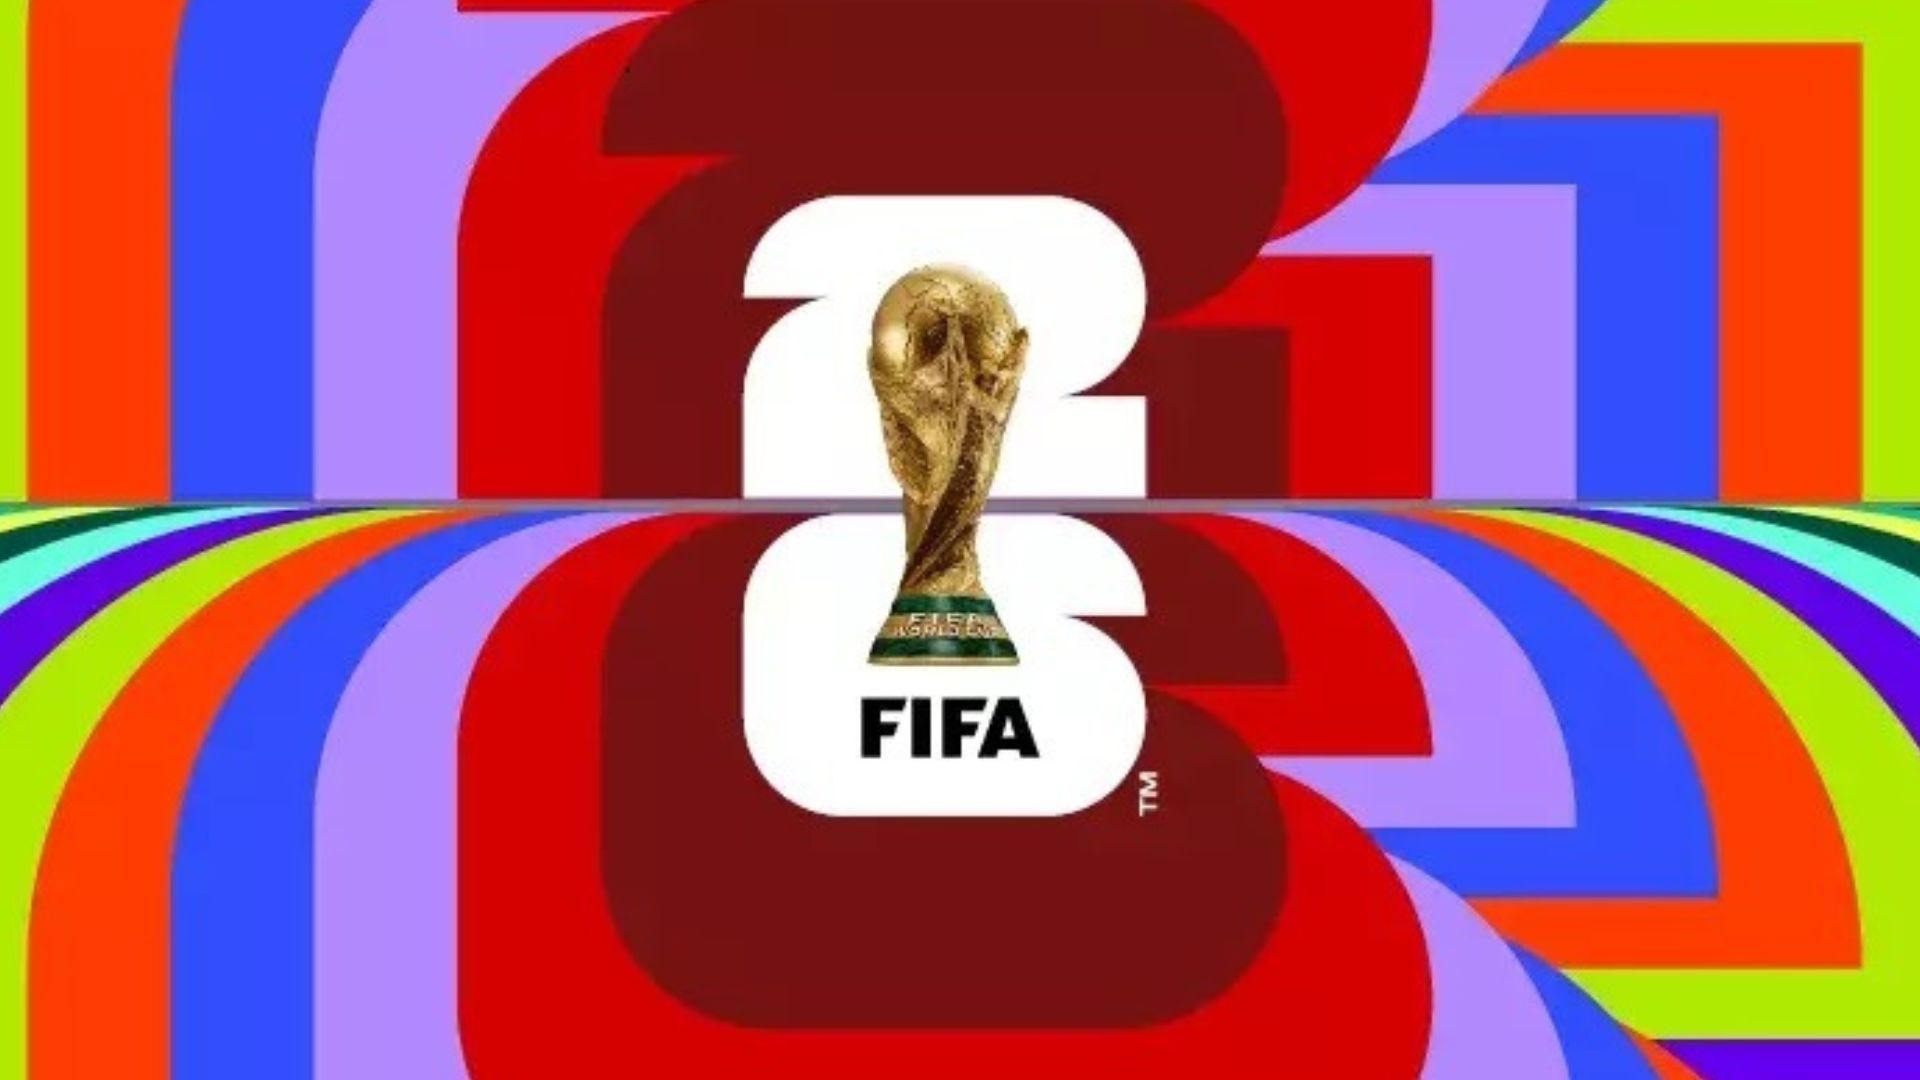 The 2026 FIFA World Cup Logo And Campaign Have Been Unveiled